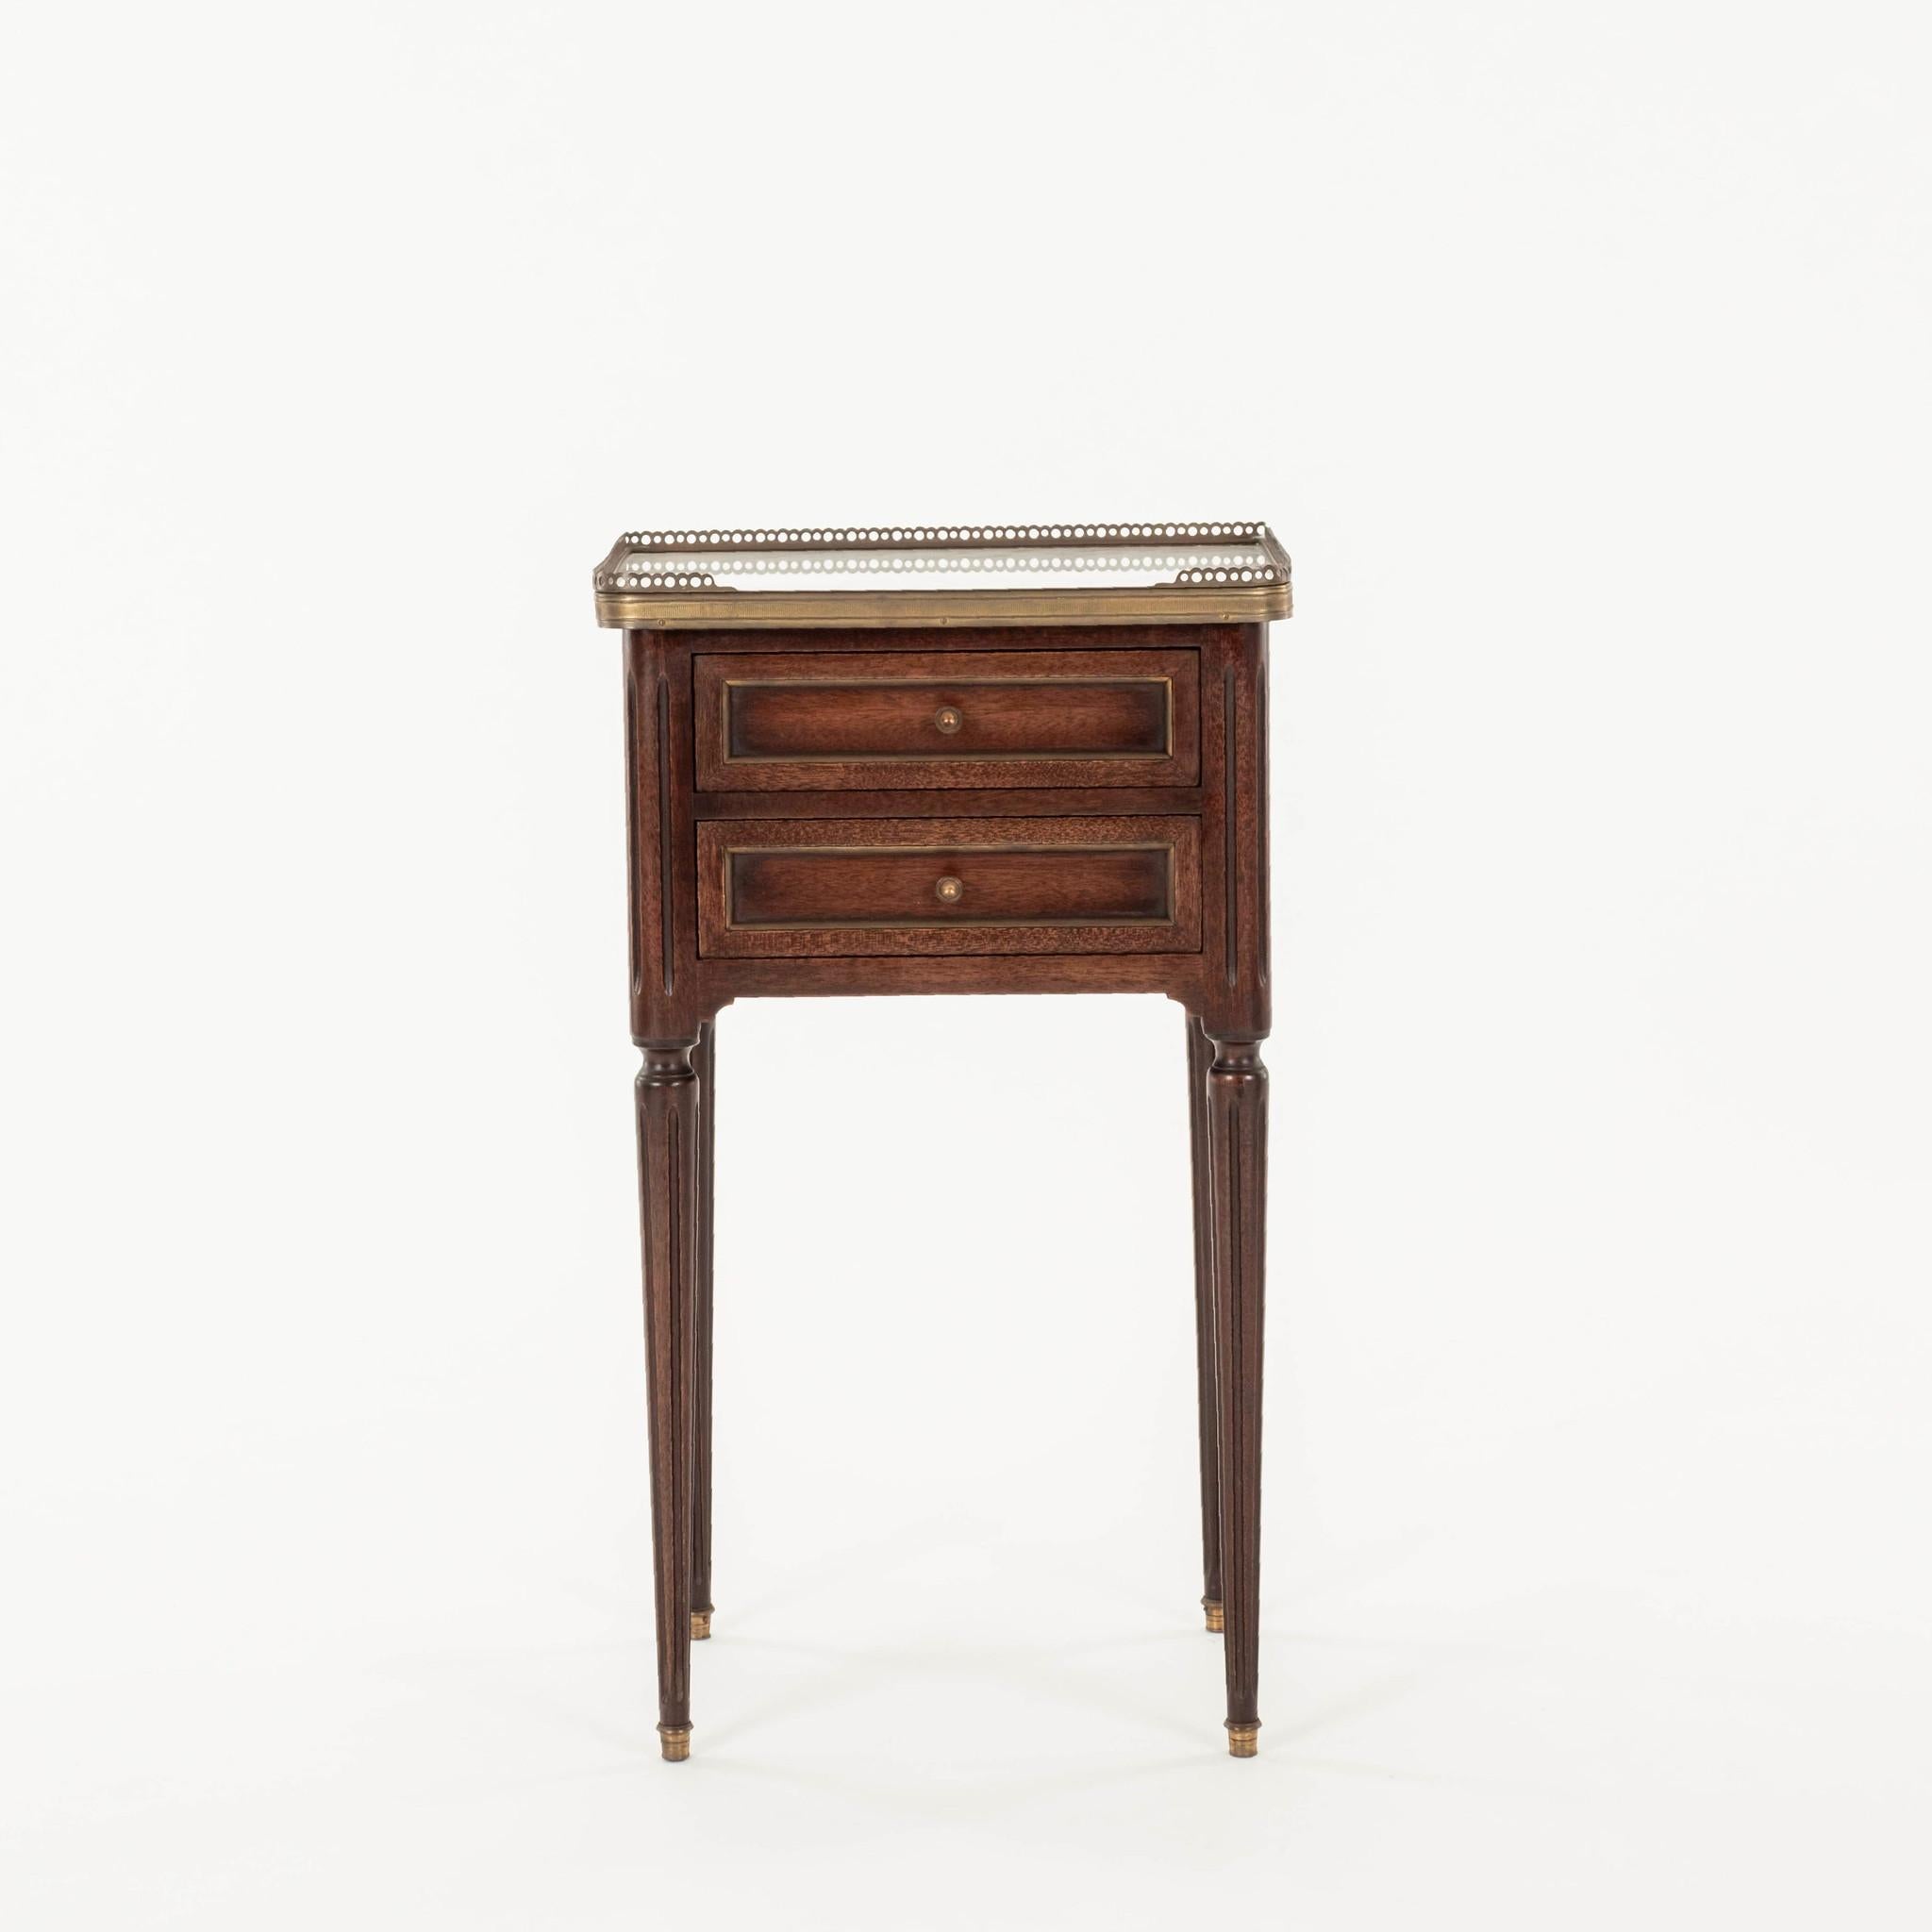 Pair 1940s French Louis XVI style gallery nightstands featuring two drawers with bronze pulls and white marble tops.